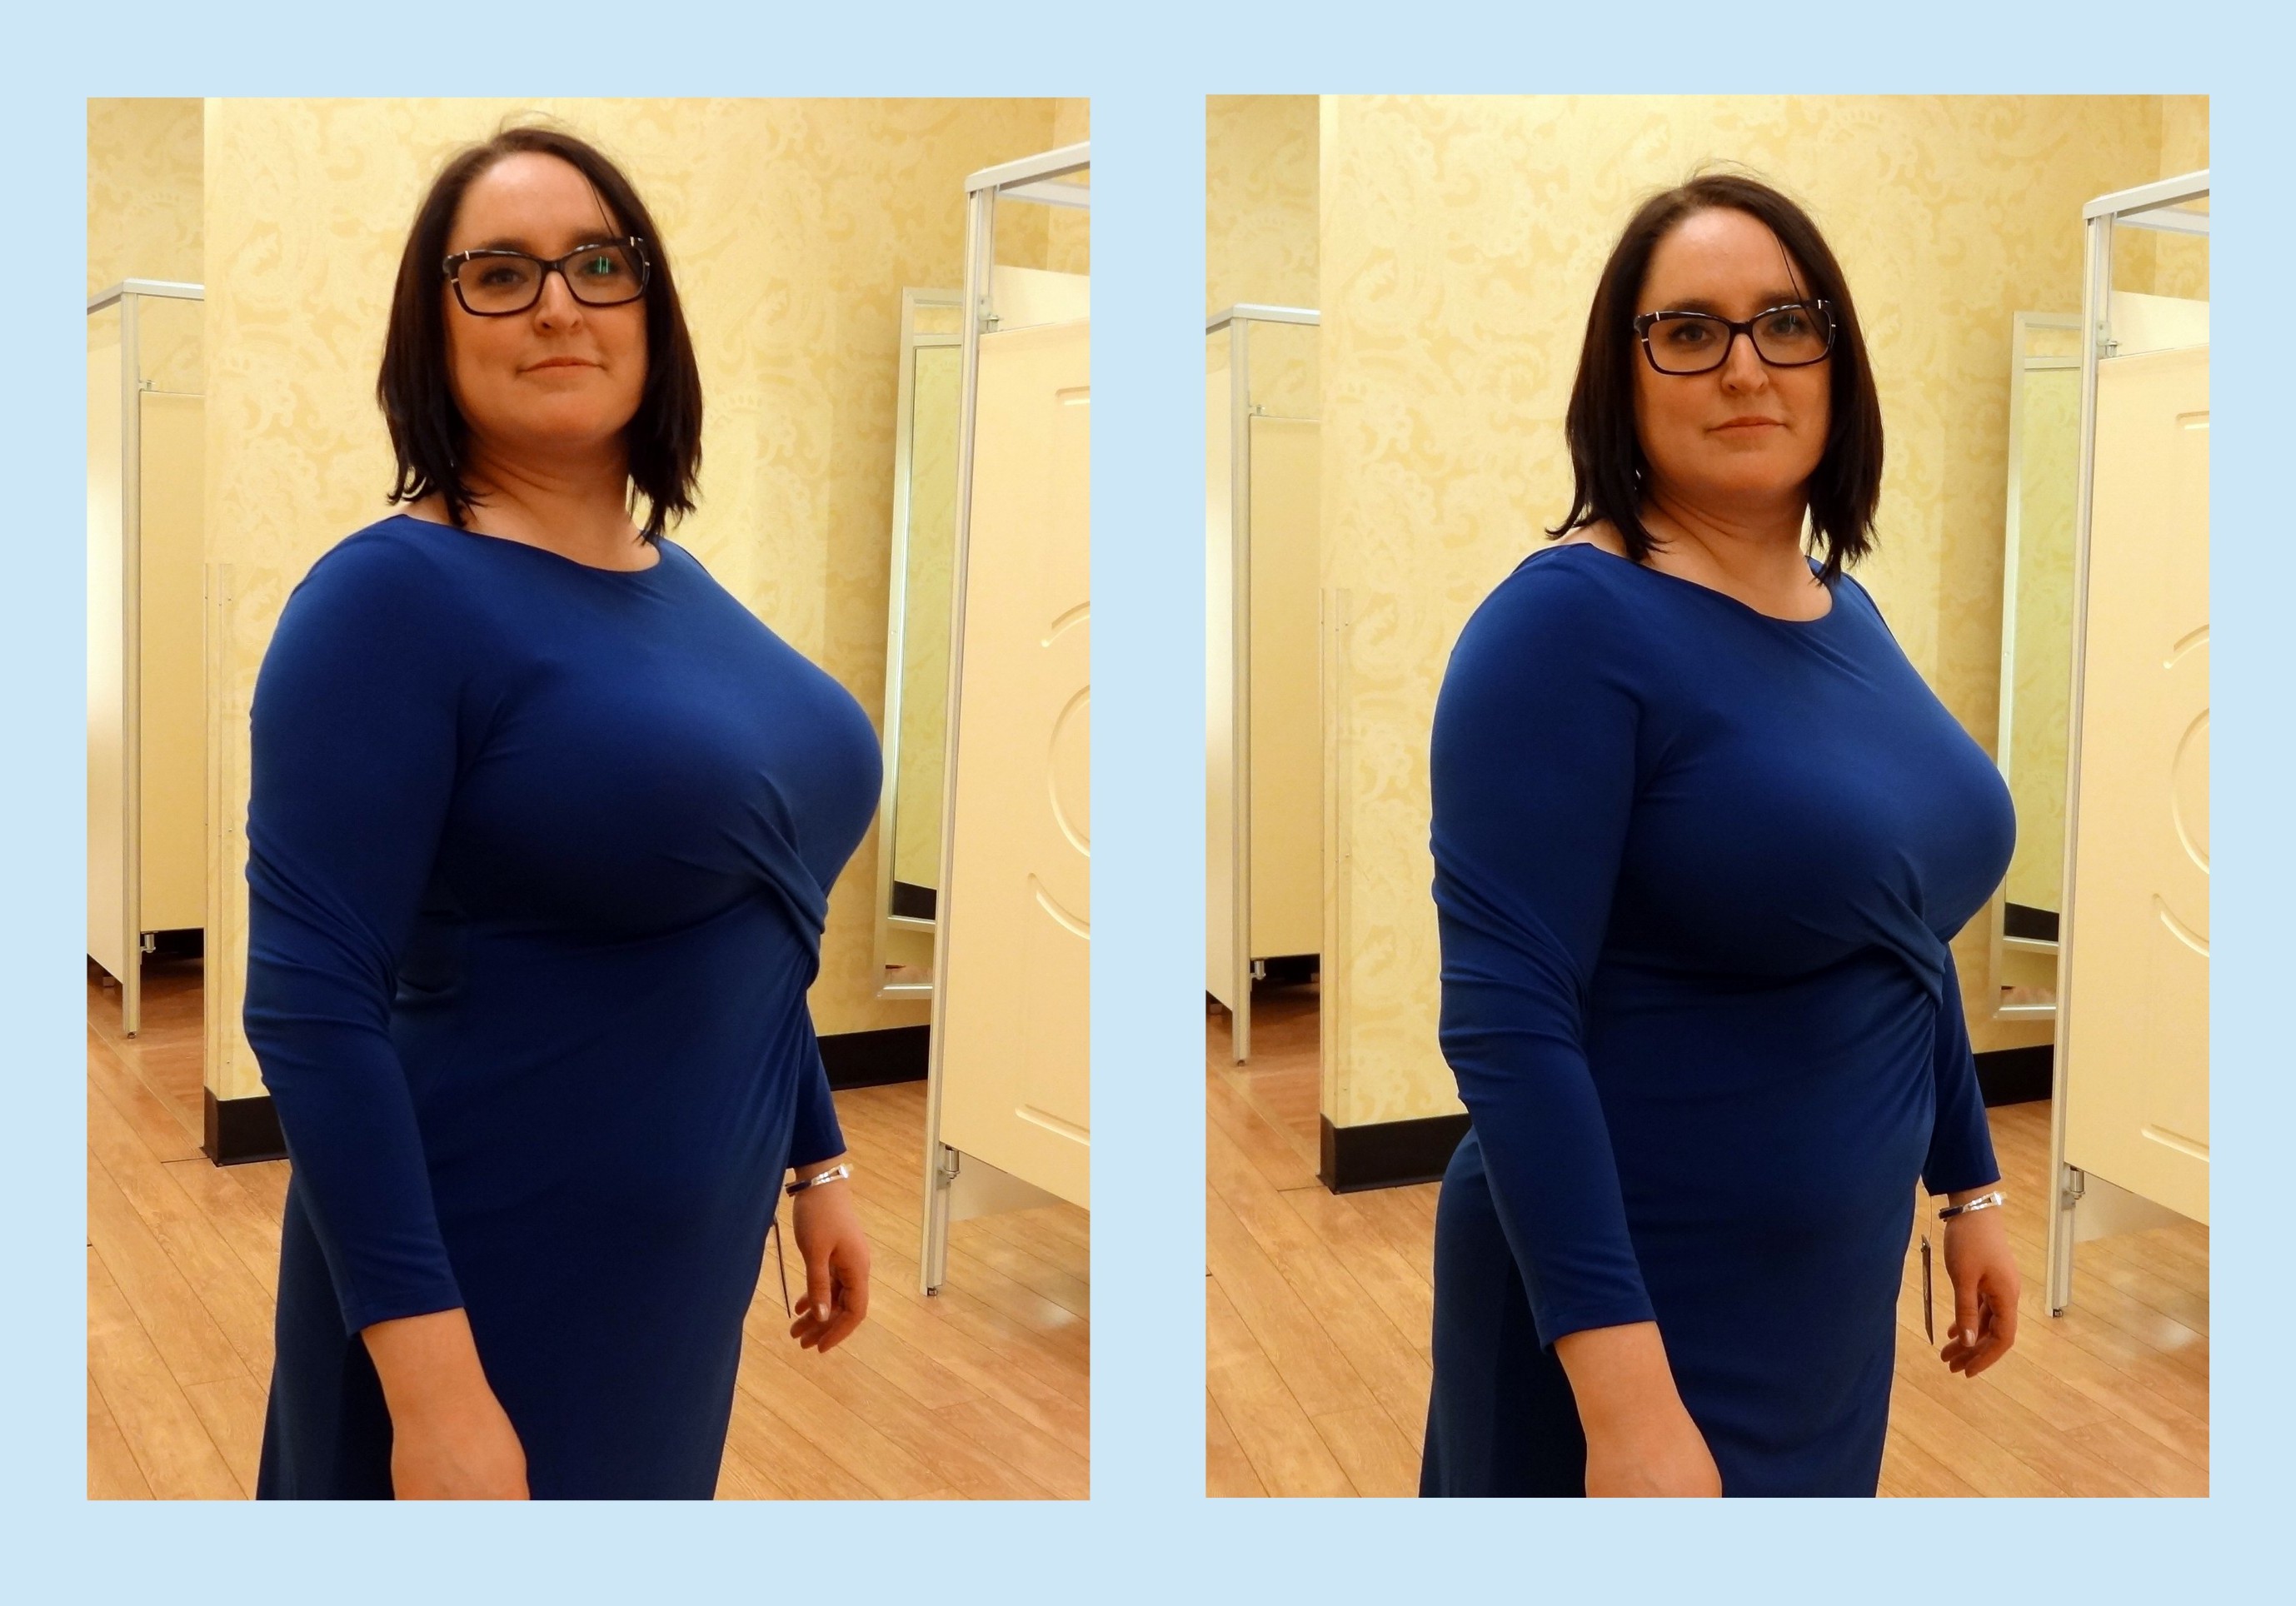 Free Photos - A Woman With An Attractive, Large Bust Size, Posing  Confidently In A Blue Dress Or Top. Her Full Breasts Are Prominent, And She  Appears To Be Proud Of Her